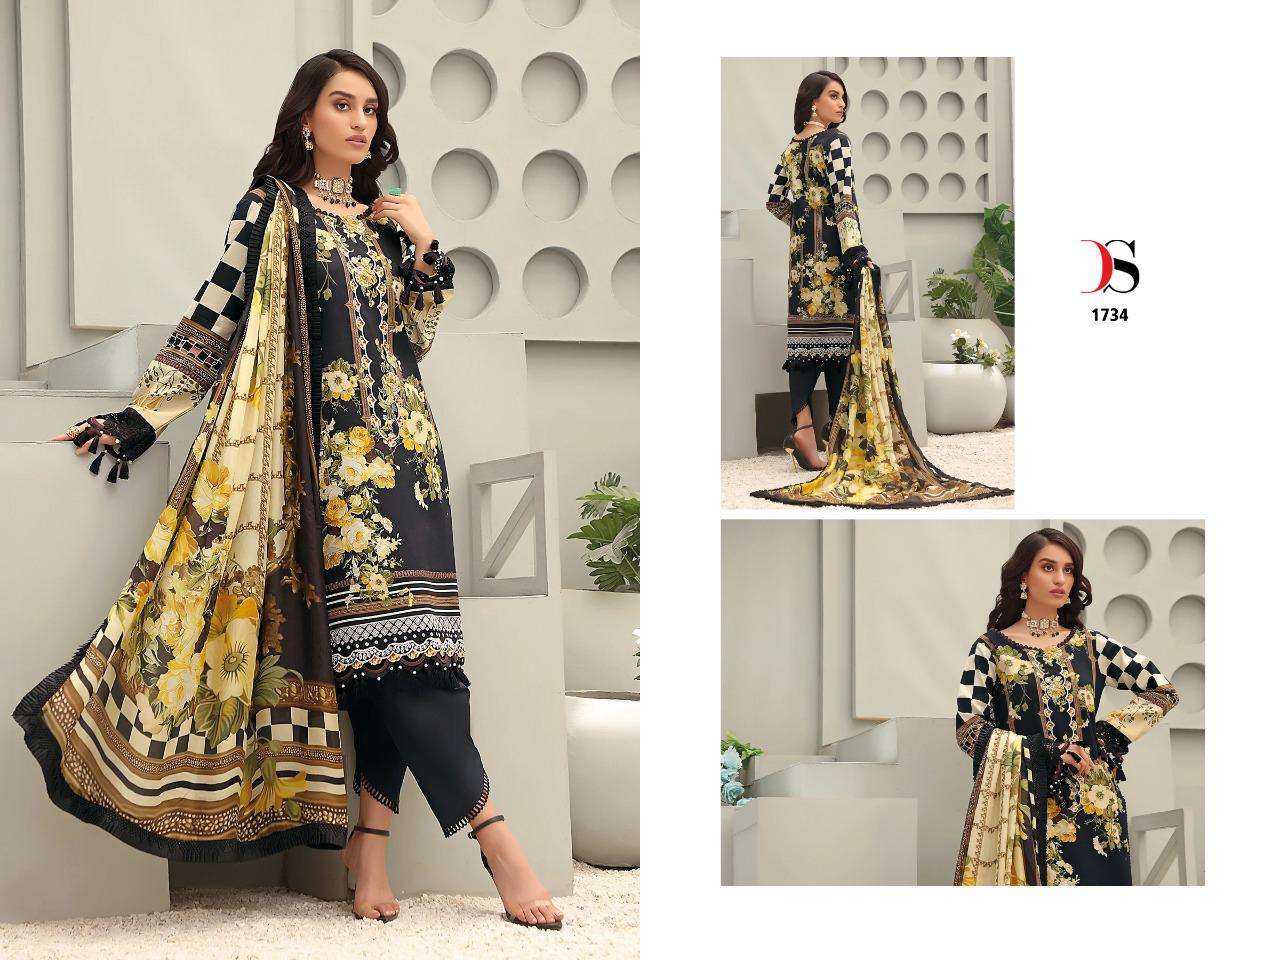 DEEPSY SUITS FIROUDS QUEENS COURT PASHMINA COLLECTION